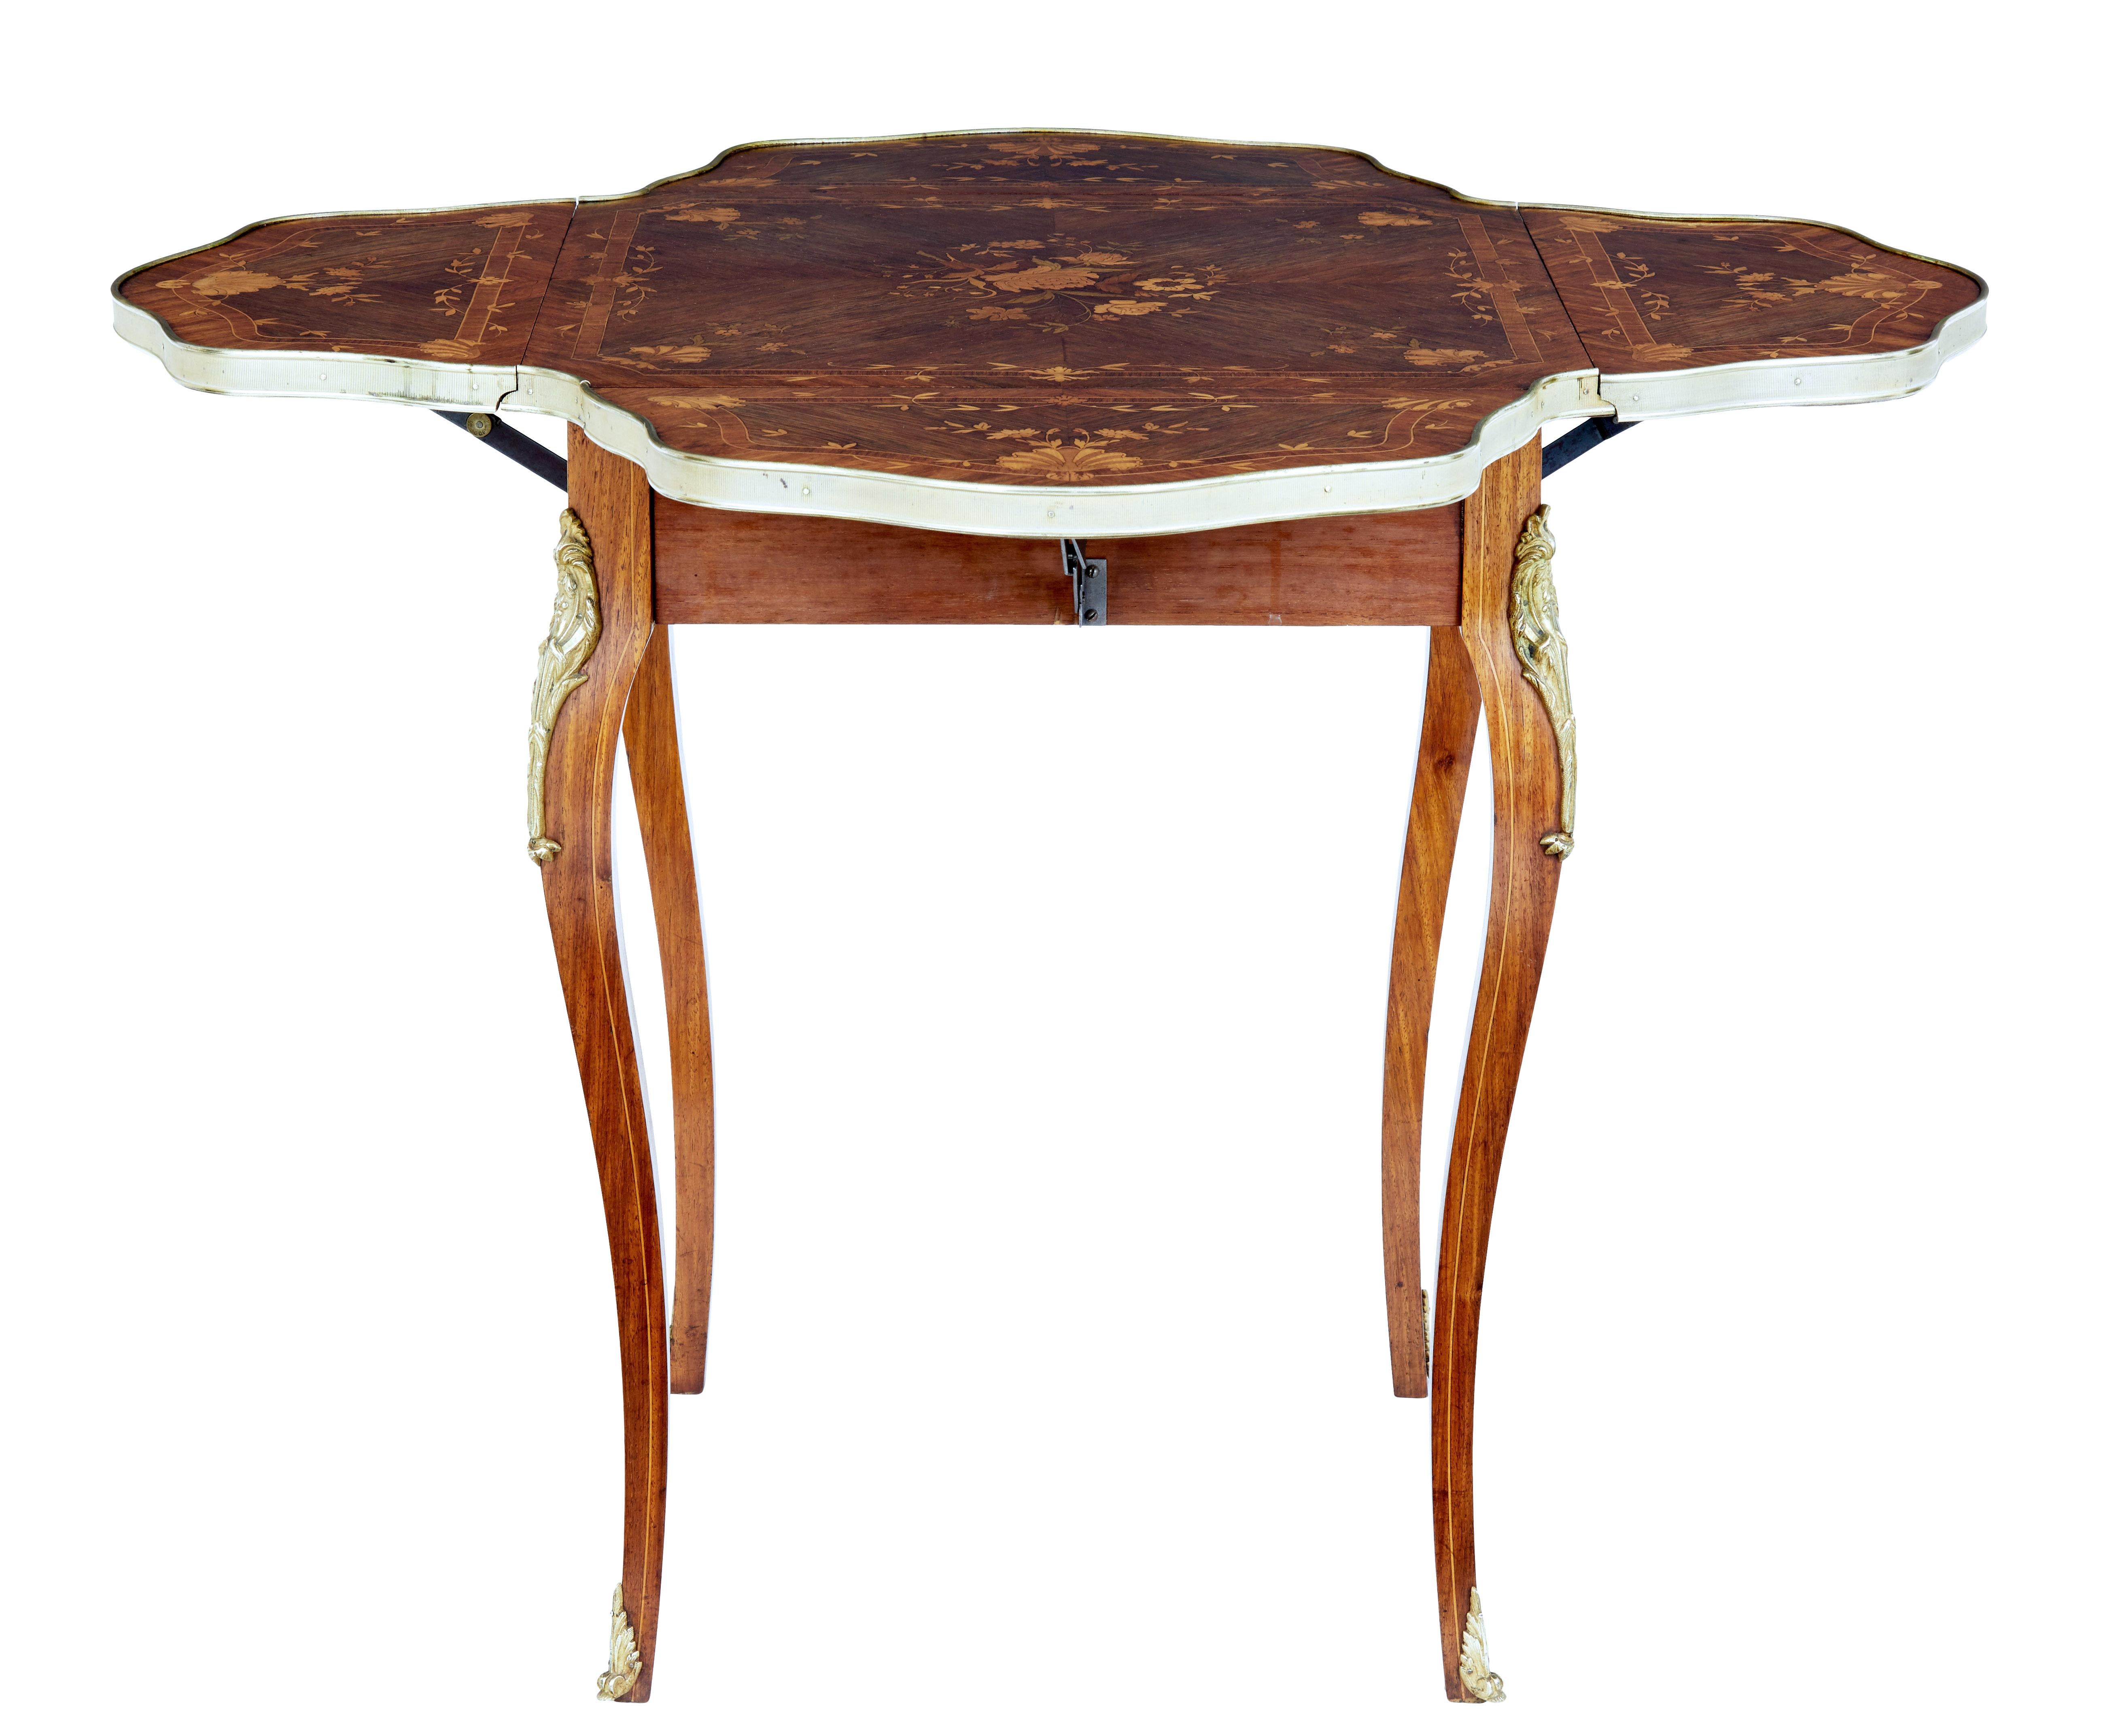 Victorian 19th Century Walnut Inlaid Envelope Drop-Leaf Occasional Table